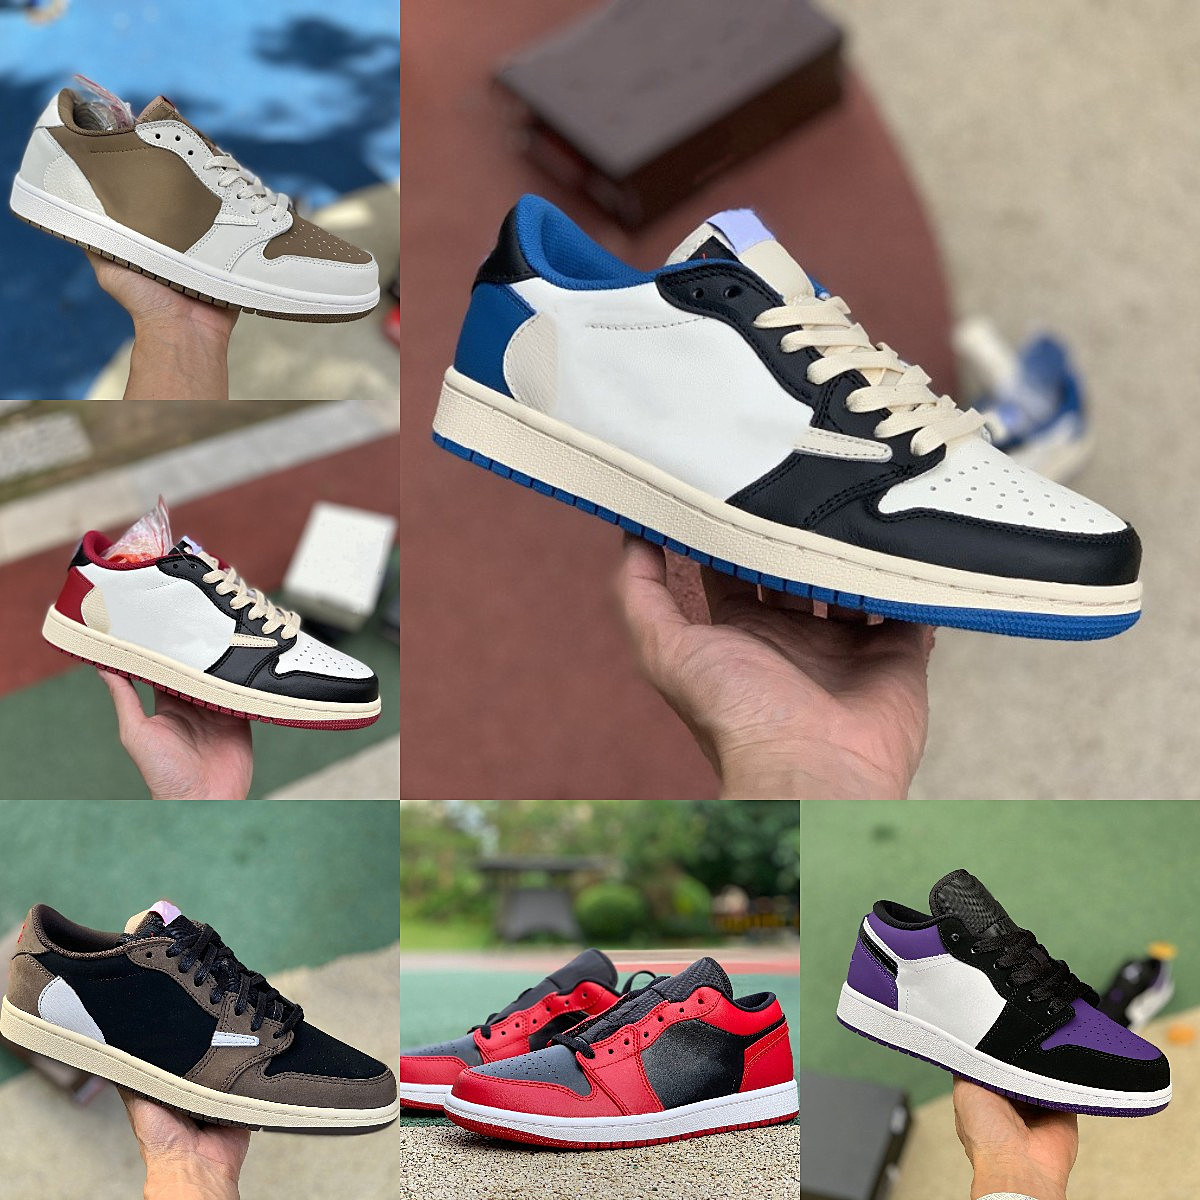 

Designers Fragment TS Jumpman Low Basketball Shoes White Brown Red Gold X 1 1S Grey Toe UNC Court Purple Black Shadow Panda Emerald Crimson Tint Sports Sneakers S28, Please contact us